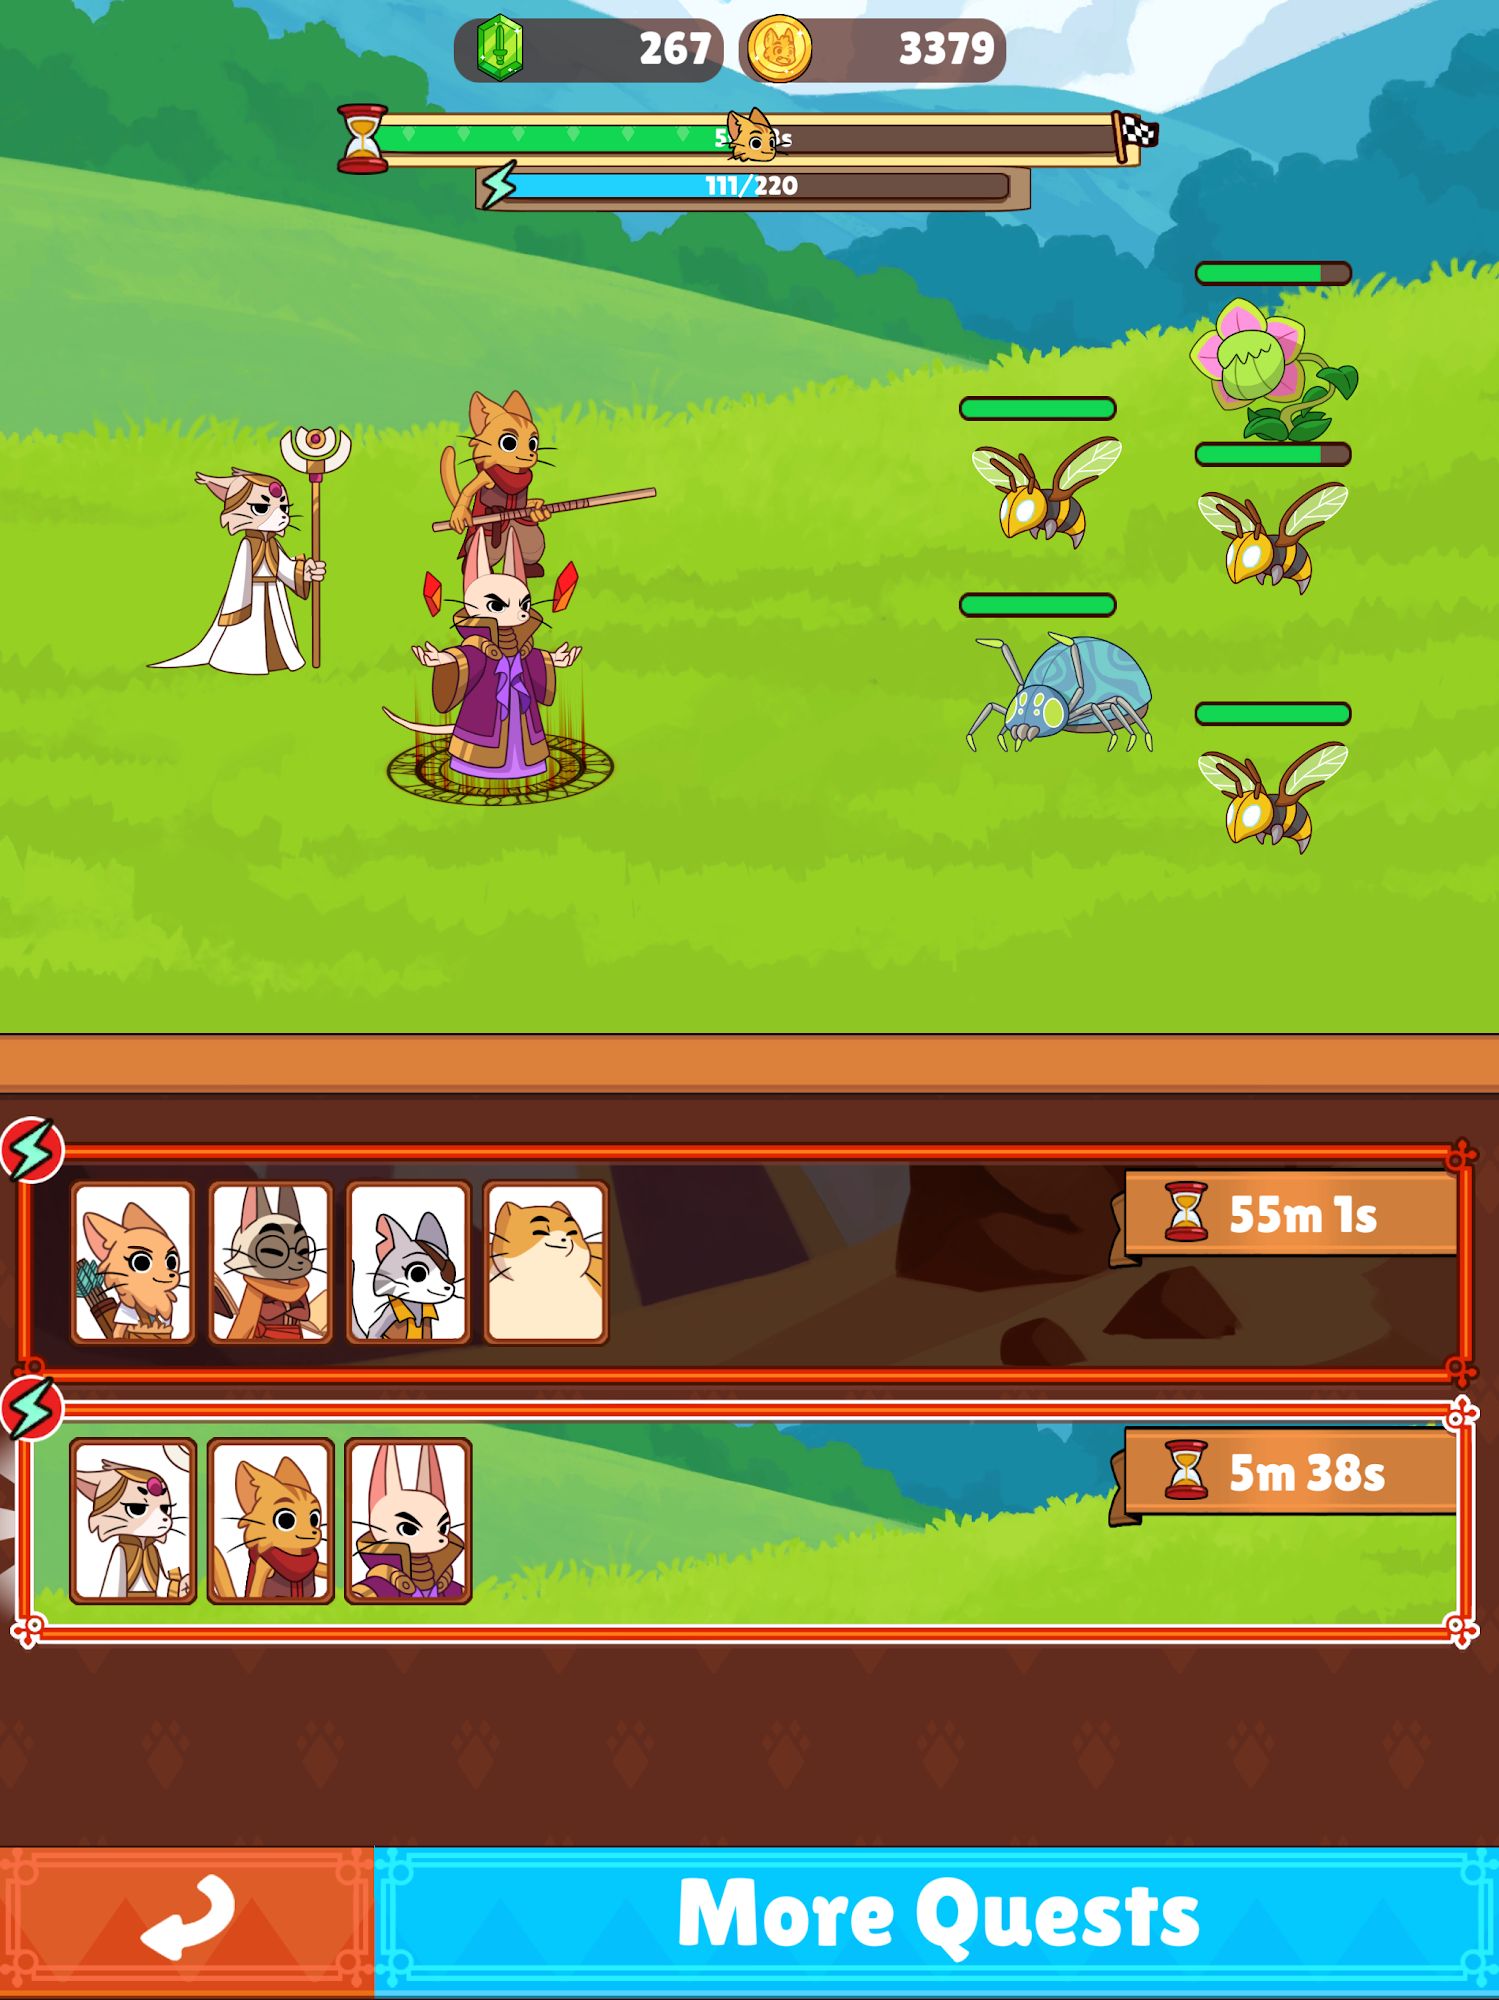 Gameplay of the Clicker Cats - RPG Idle Heroes for Android phone or tablet.